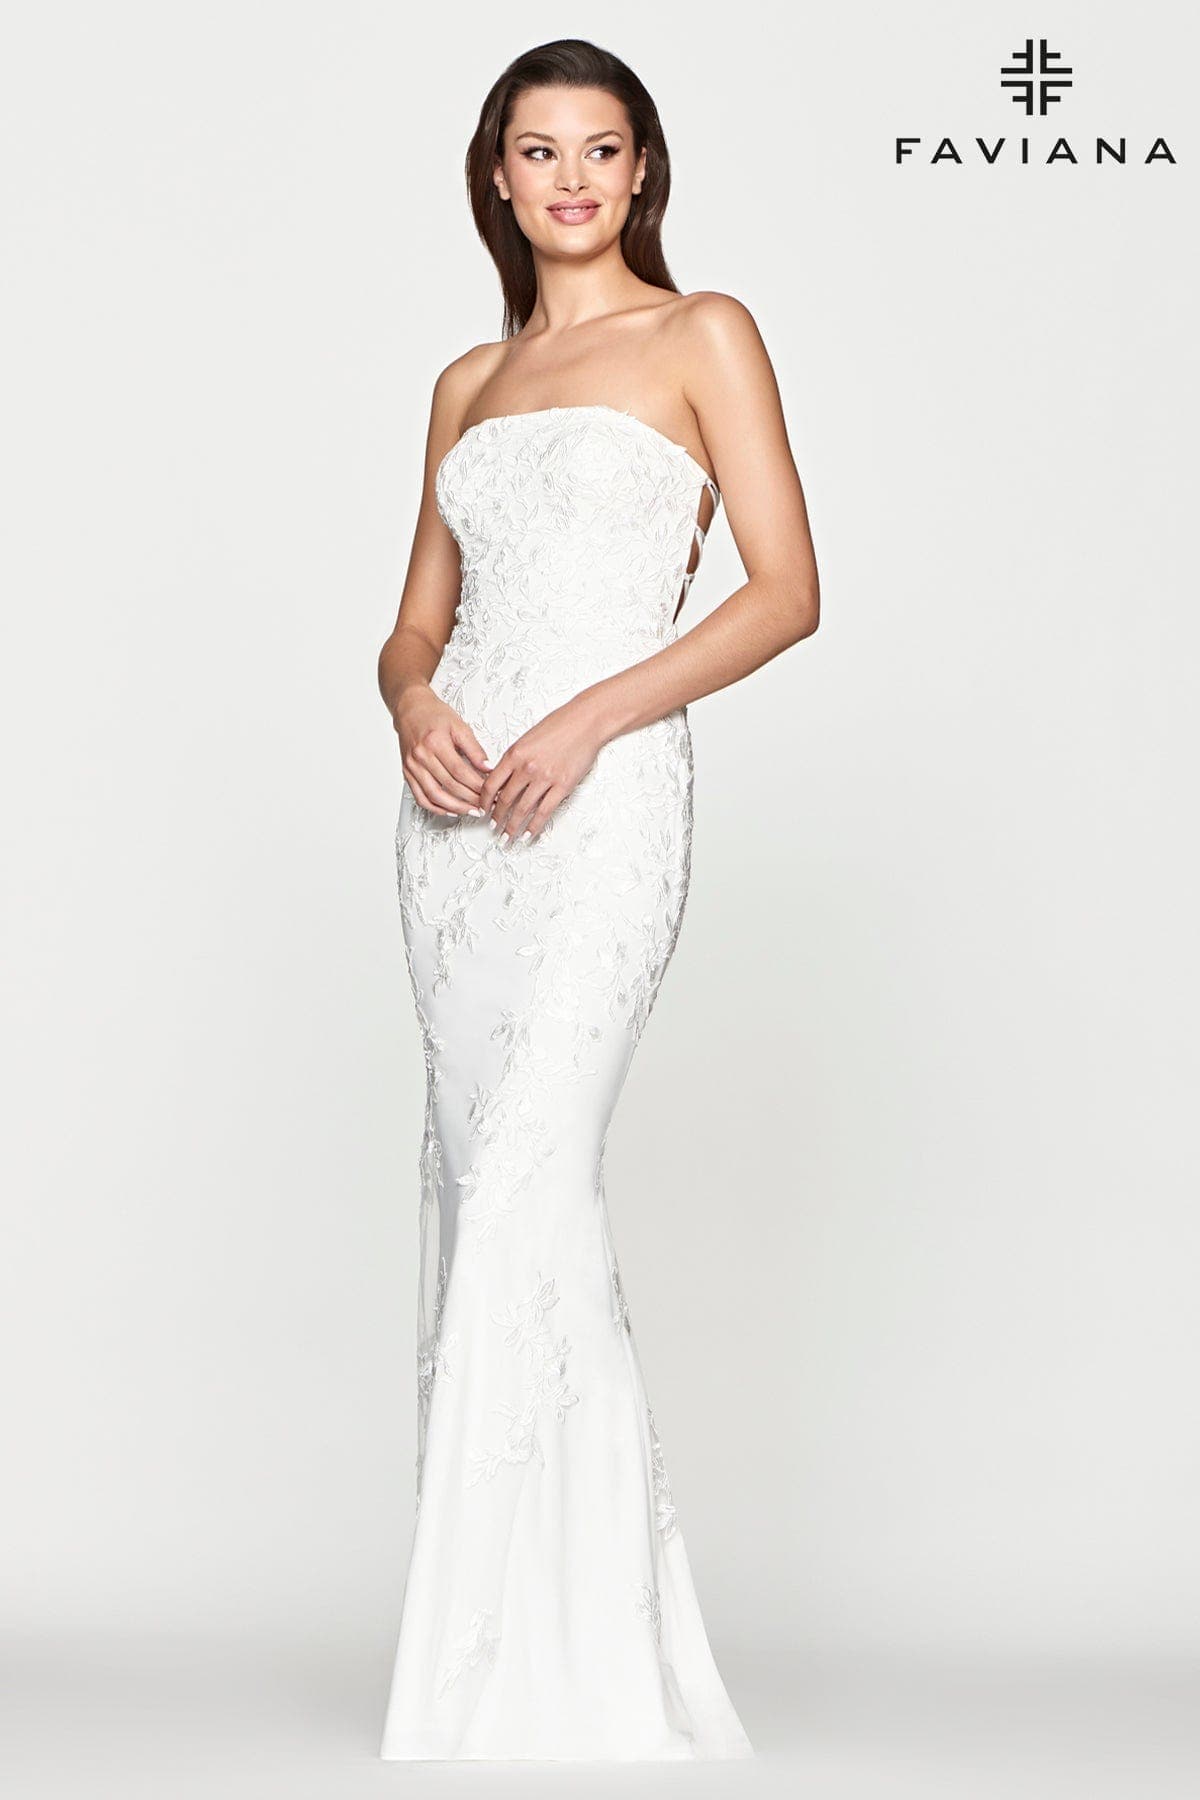 Straight Neckline Dress Strapless With Lace Fabric